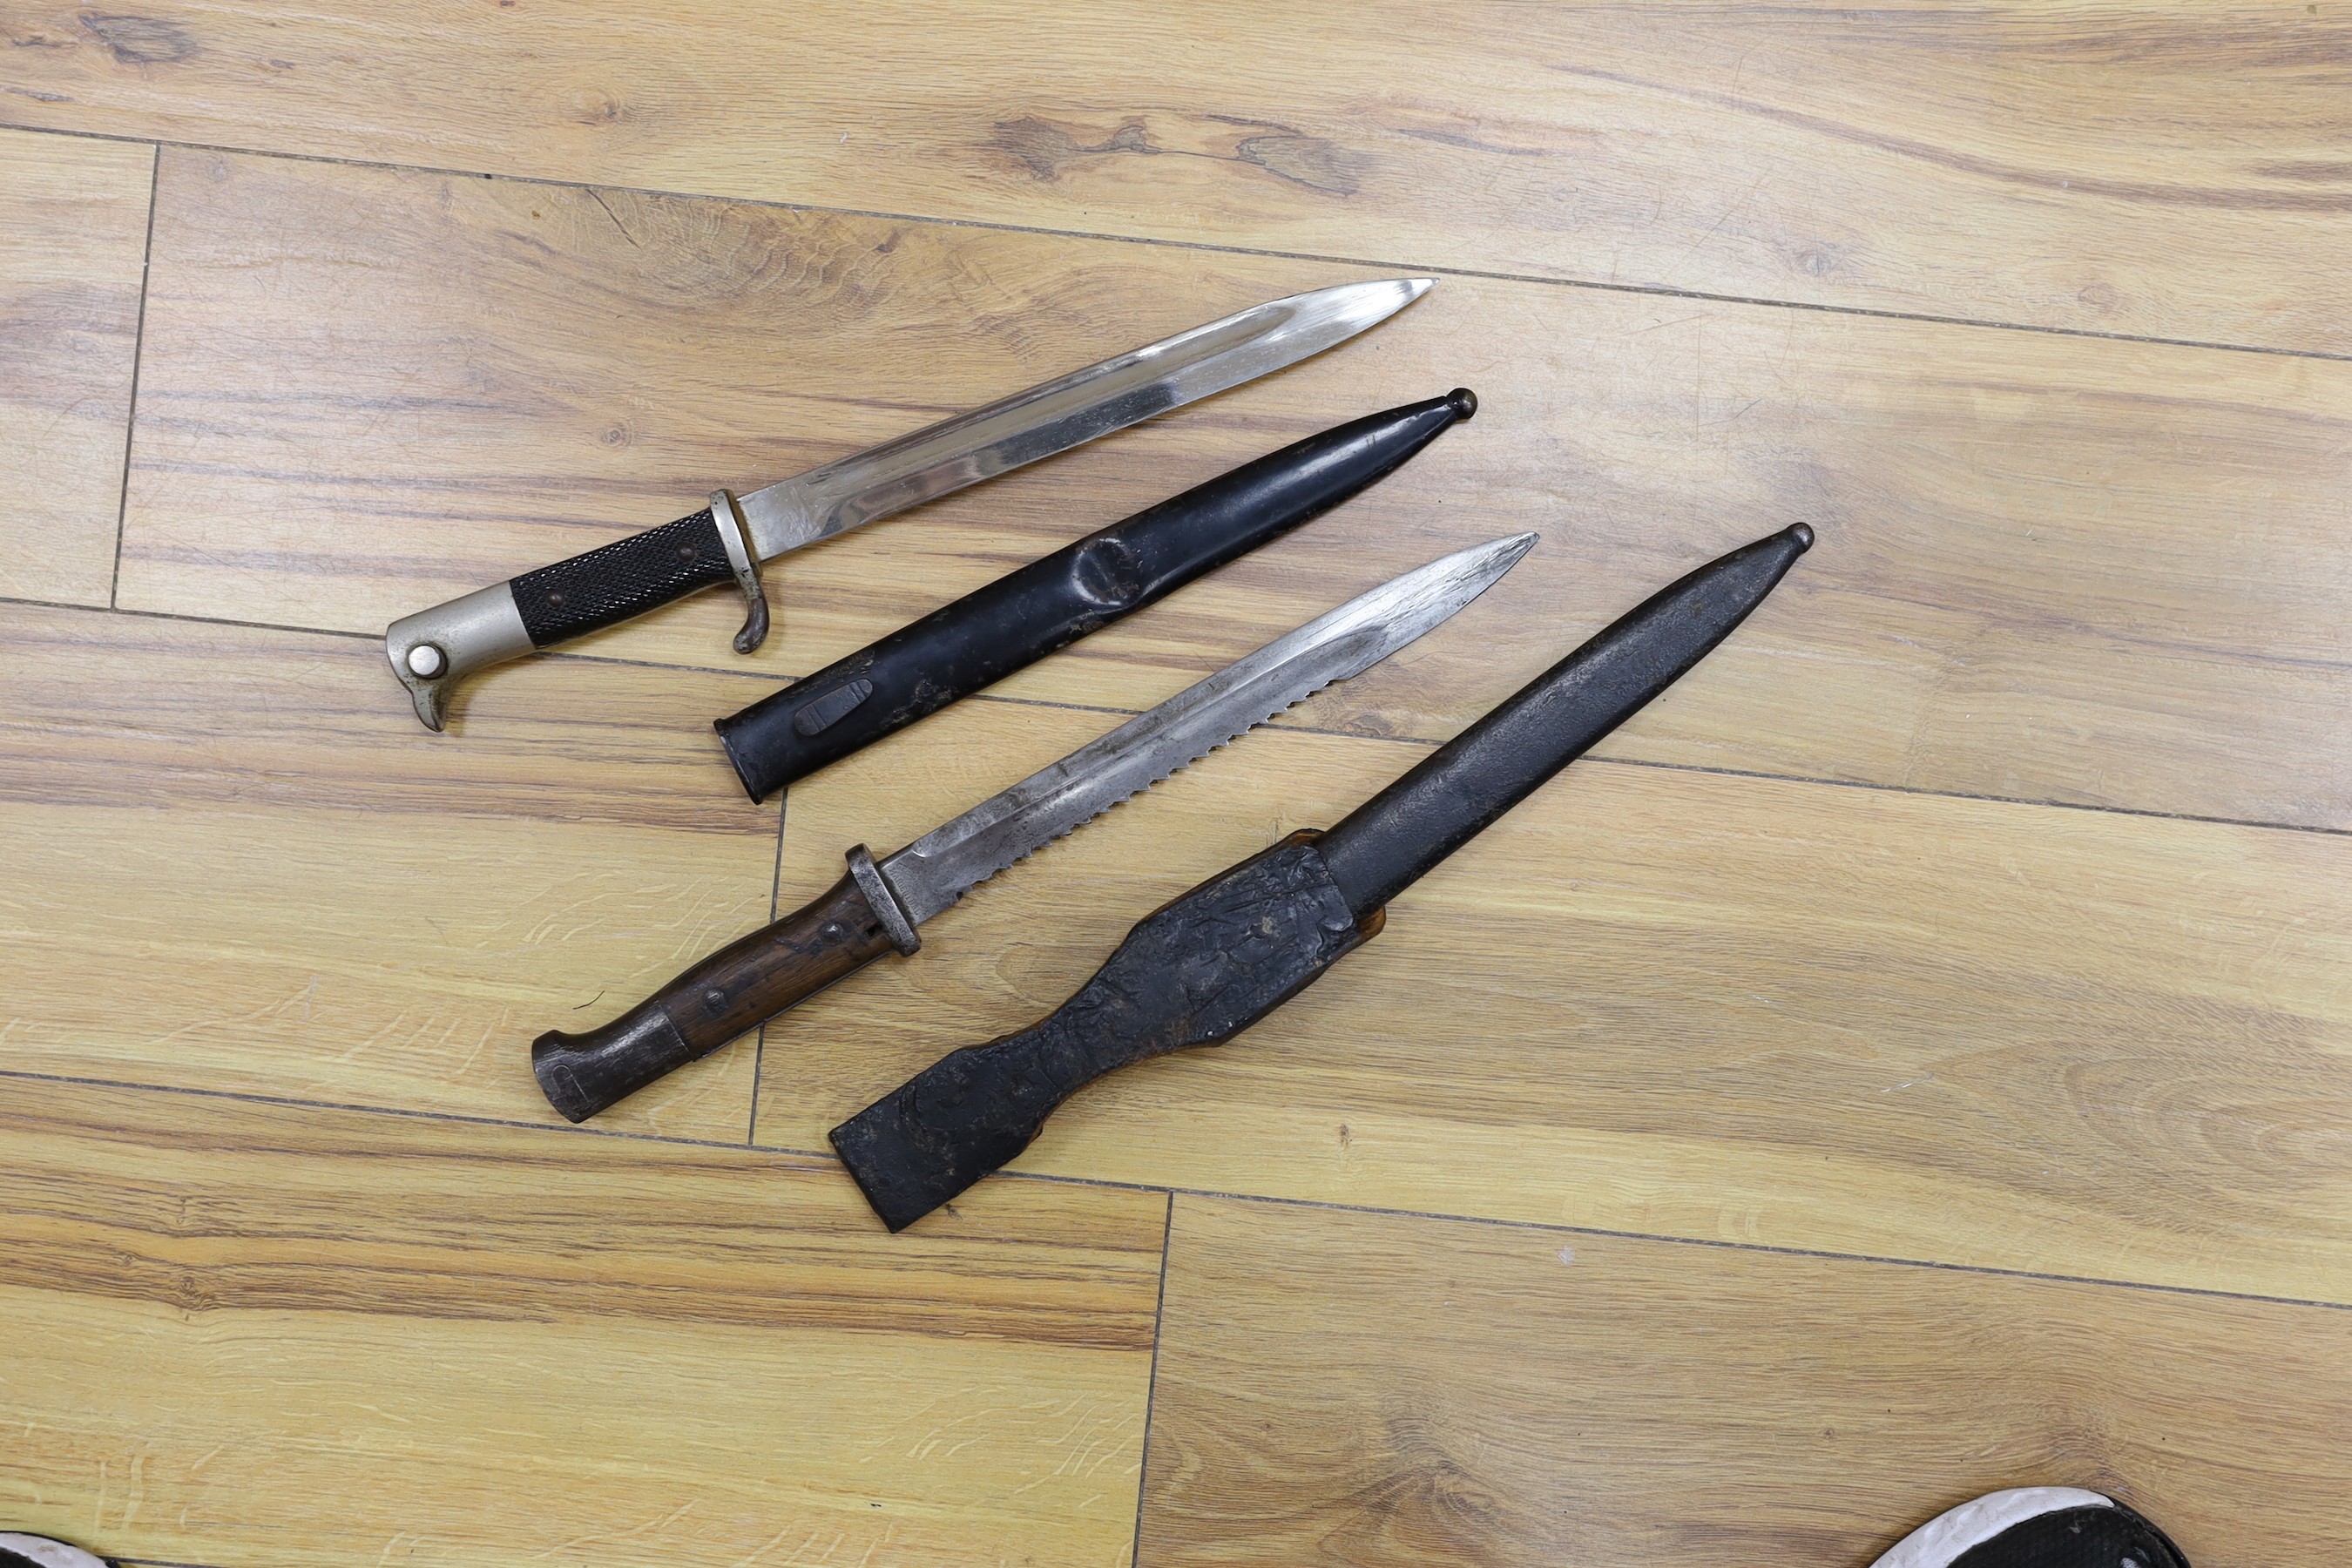 A 19th century Naval sword marked Wilkinson and a Hawks and Co. George V officer's dress sword and two bayonets